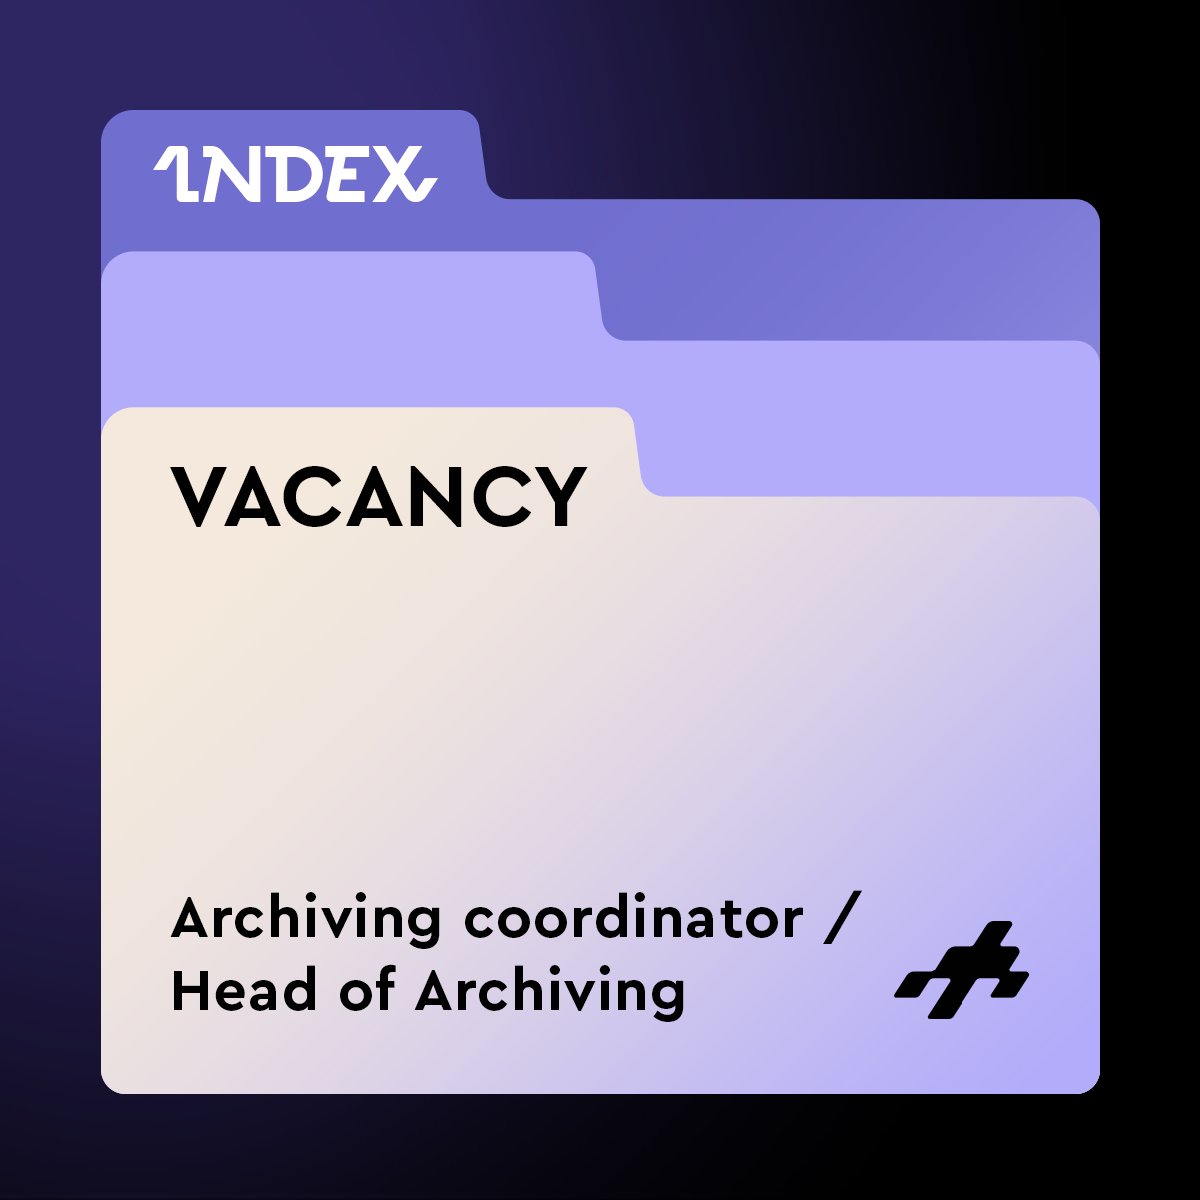 🟪 We are thrilled to announce a new job opportunity in the area of digital preservation, archiving activities, and documentation networking. 🟣 Learn here how to apply for the role of Archiving coordinator / Head of archiving (depending on experience): index-ukraine.org/news/vacancy-a…